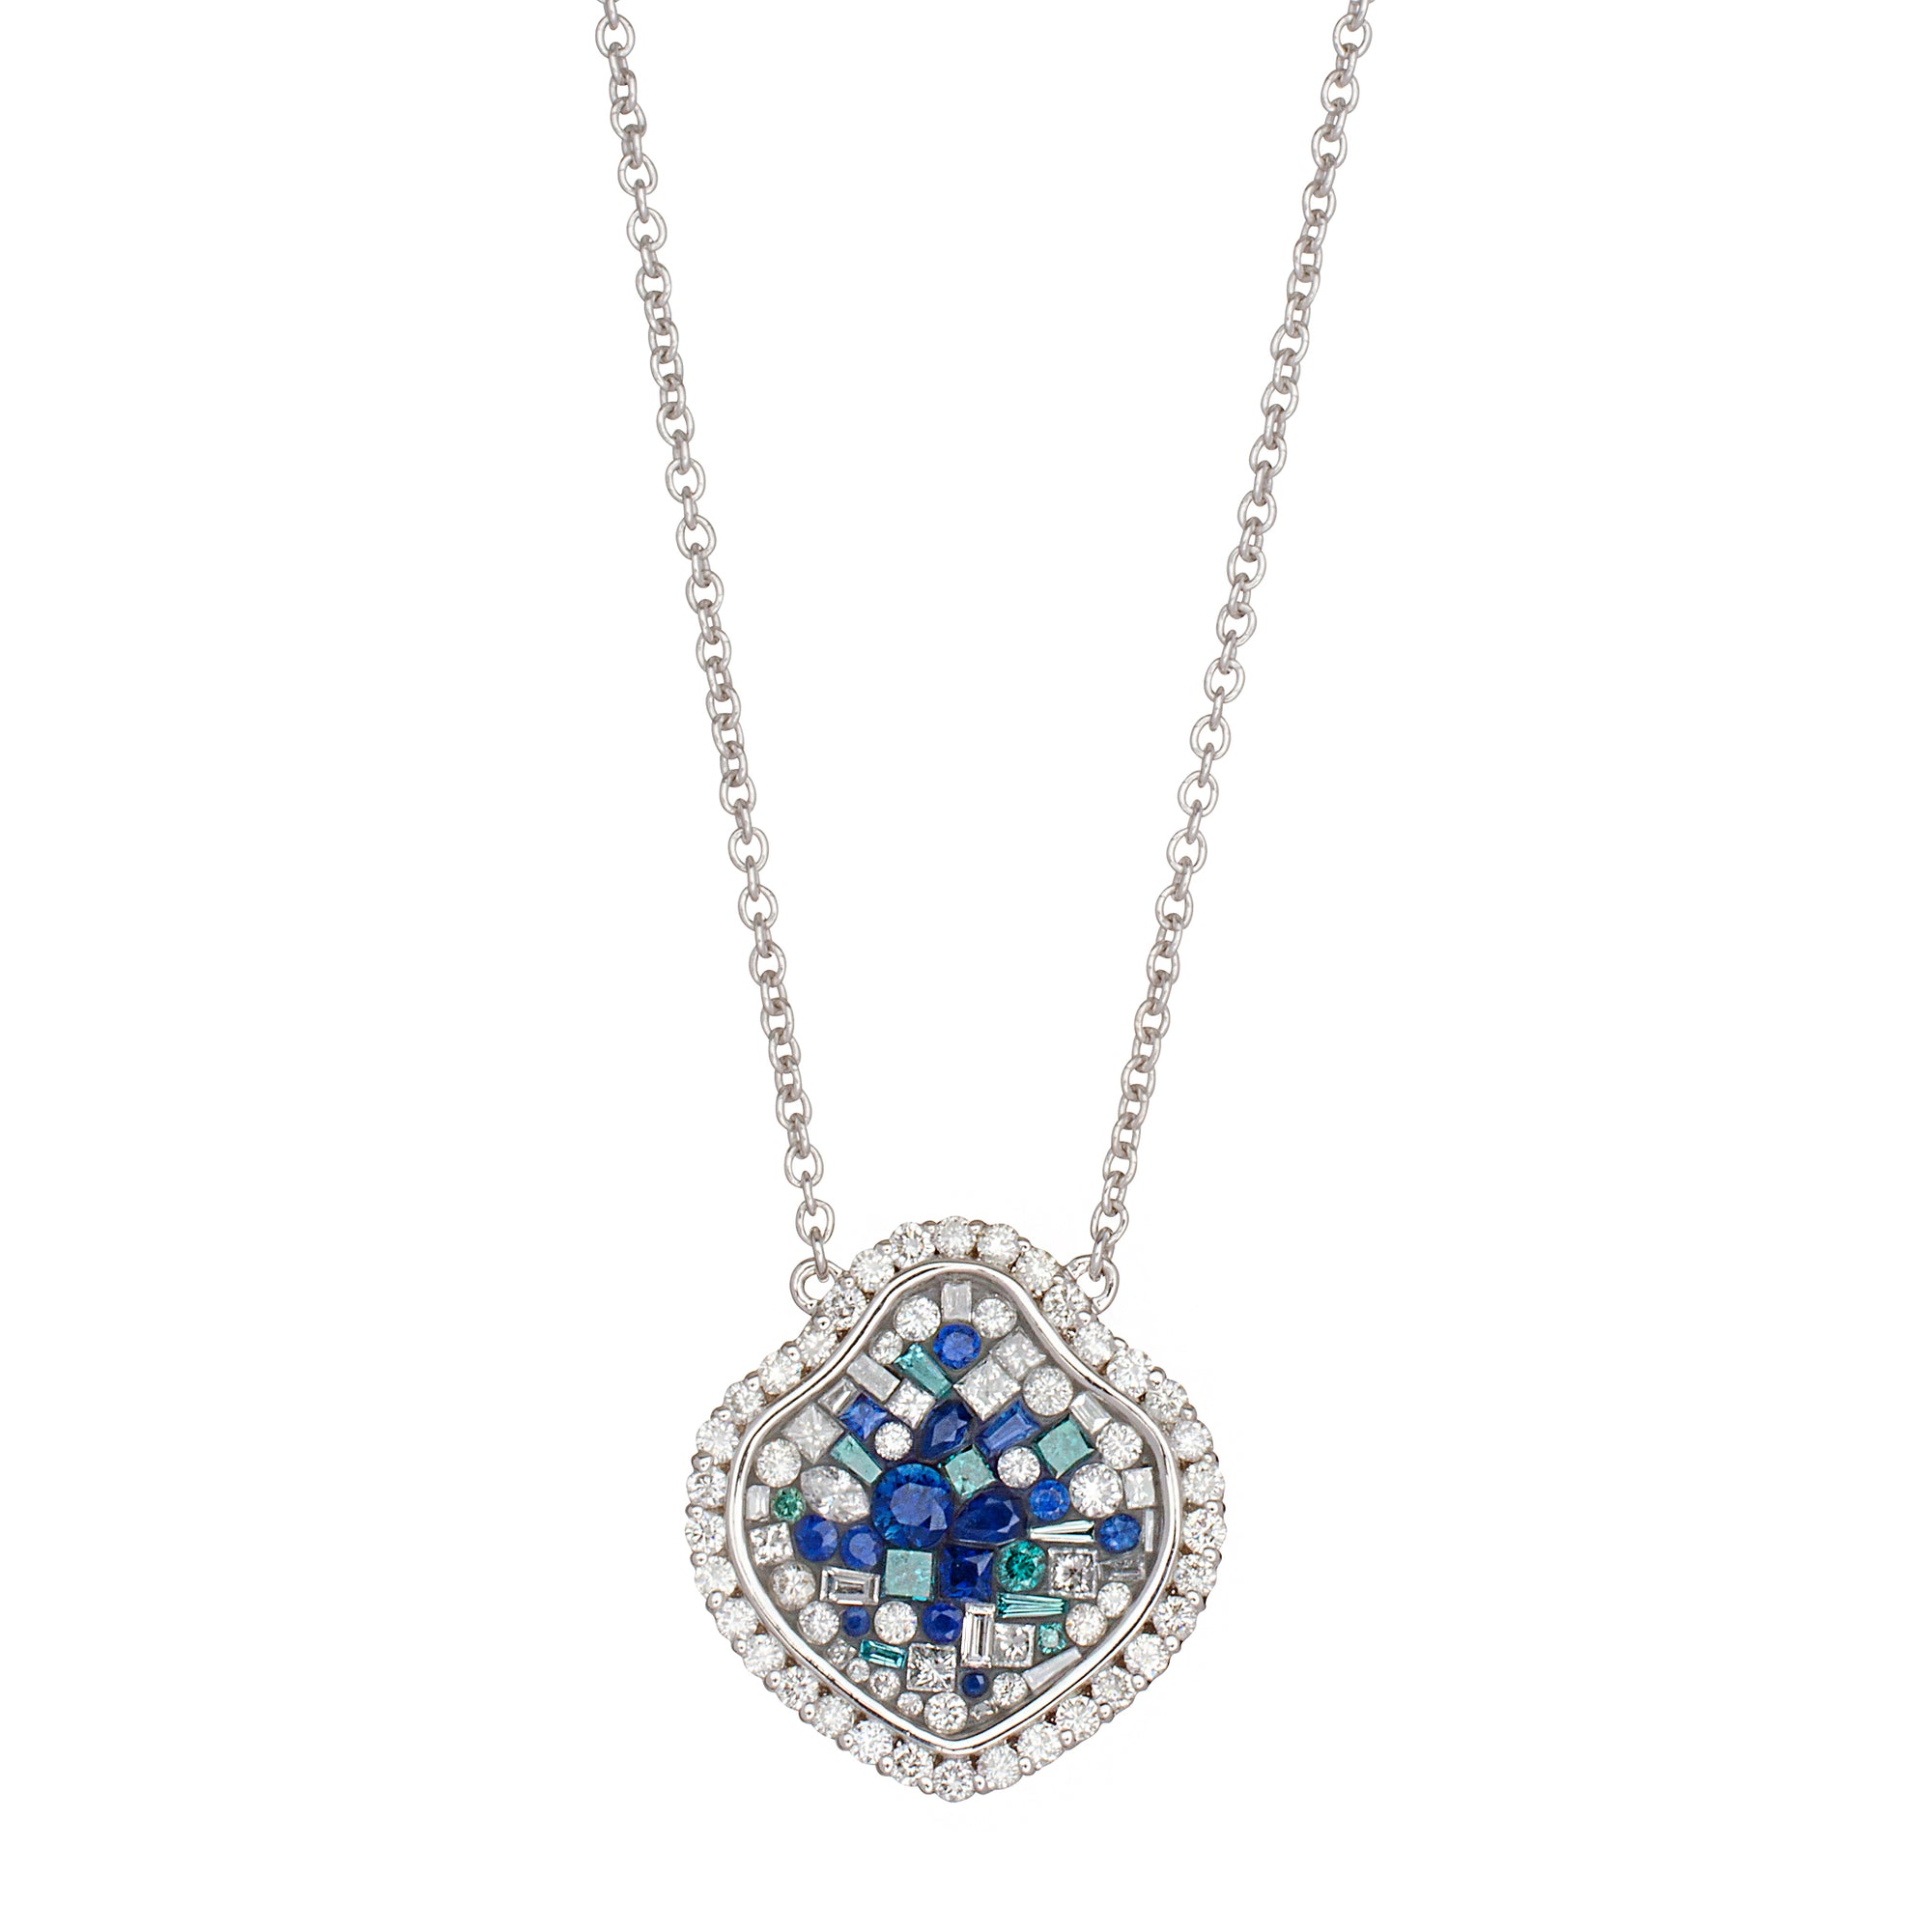 Blue Galaxy Diamond Heart Necklace by Pleve available at Talisman Collection Fine Jewelers in El Dorado Hills, CA and online. Specs: 1.90 cts white & color enhanced diamonds; 18k white gold.